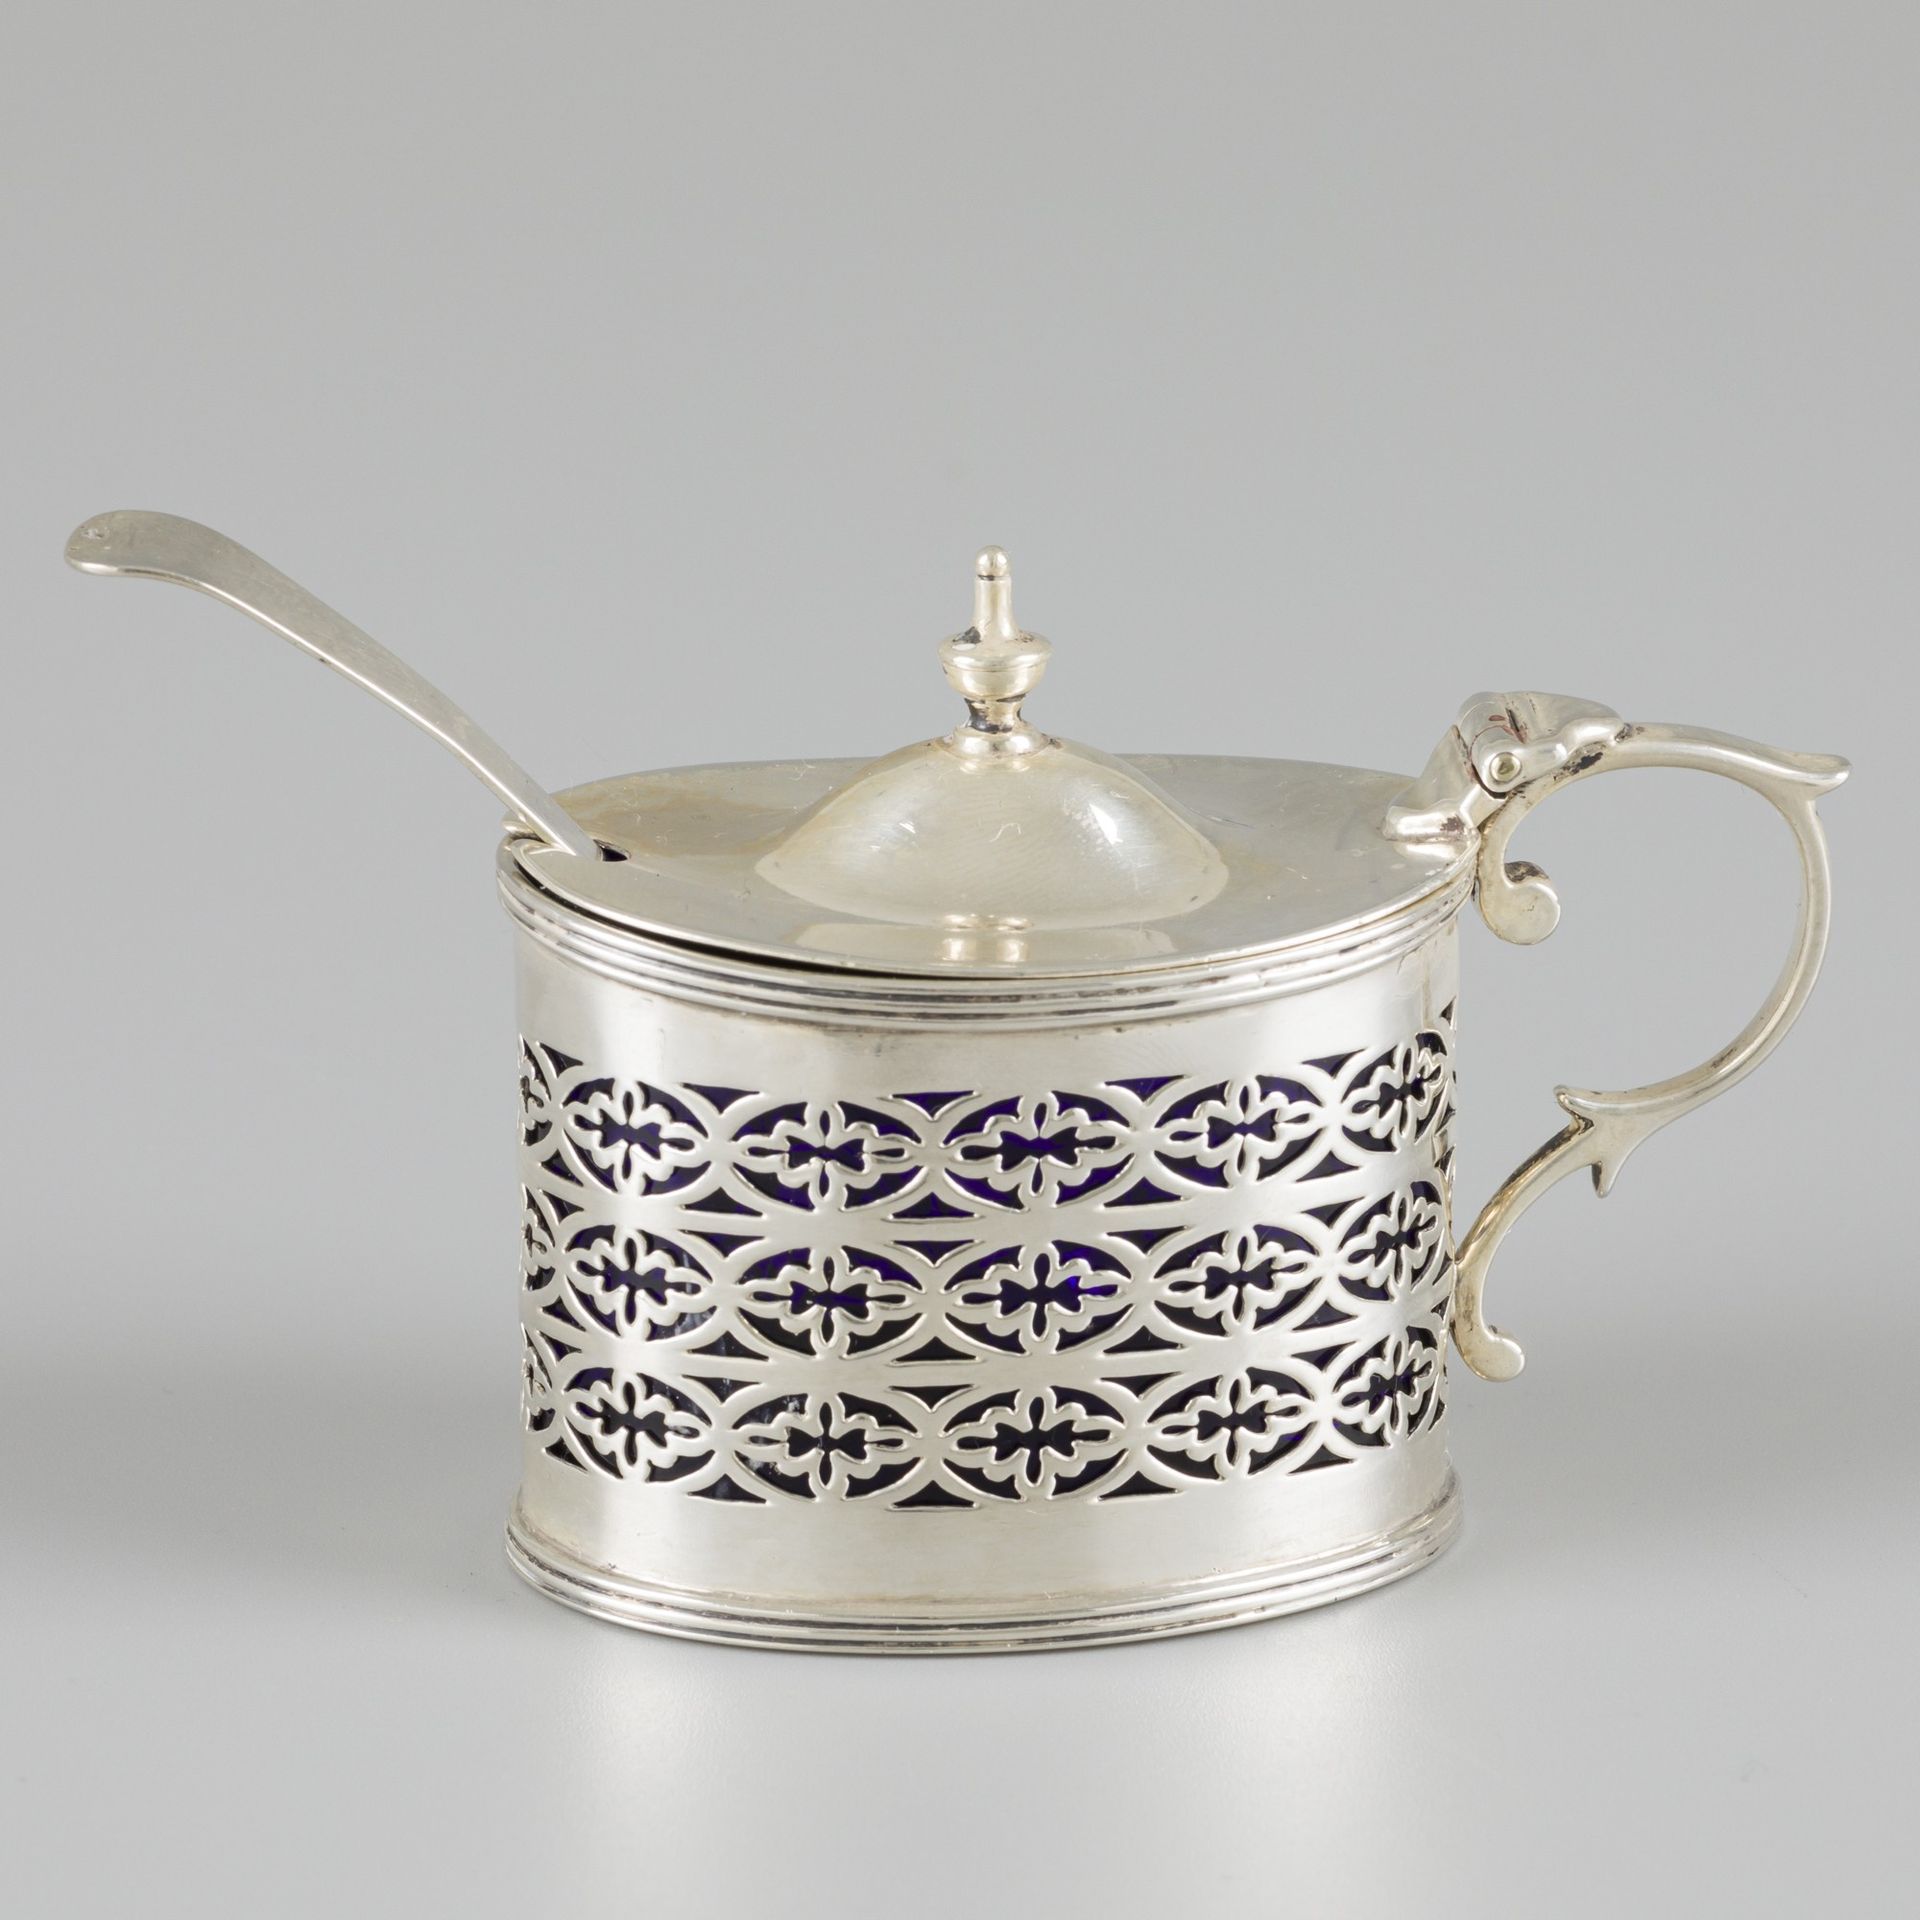 Mustard pot with spoon, silver. Oval model with hinged lid, edging and openwork &hellip;